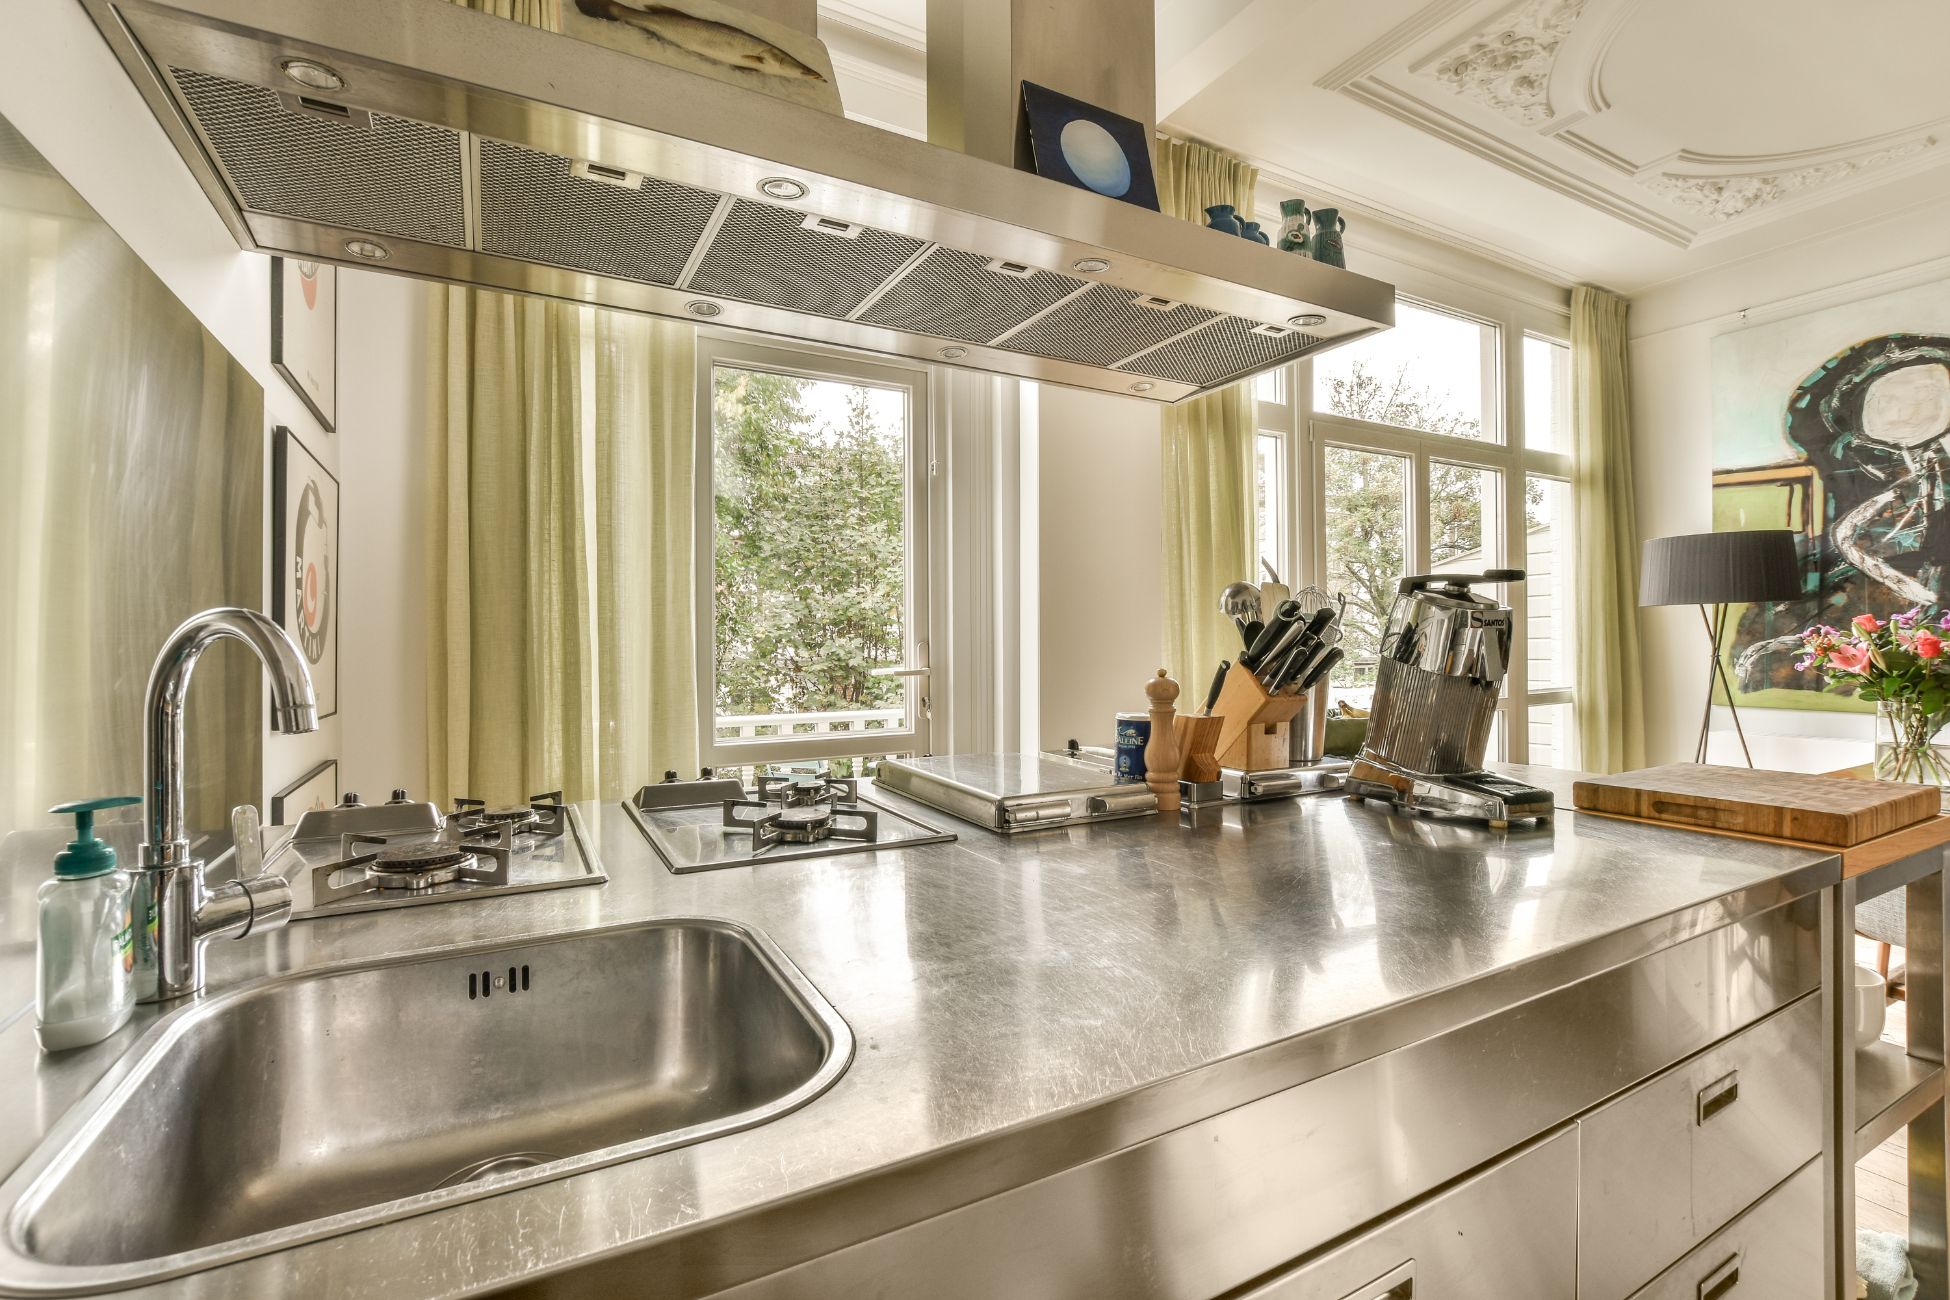 Traditional kitchen style with stainless steel countertop